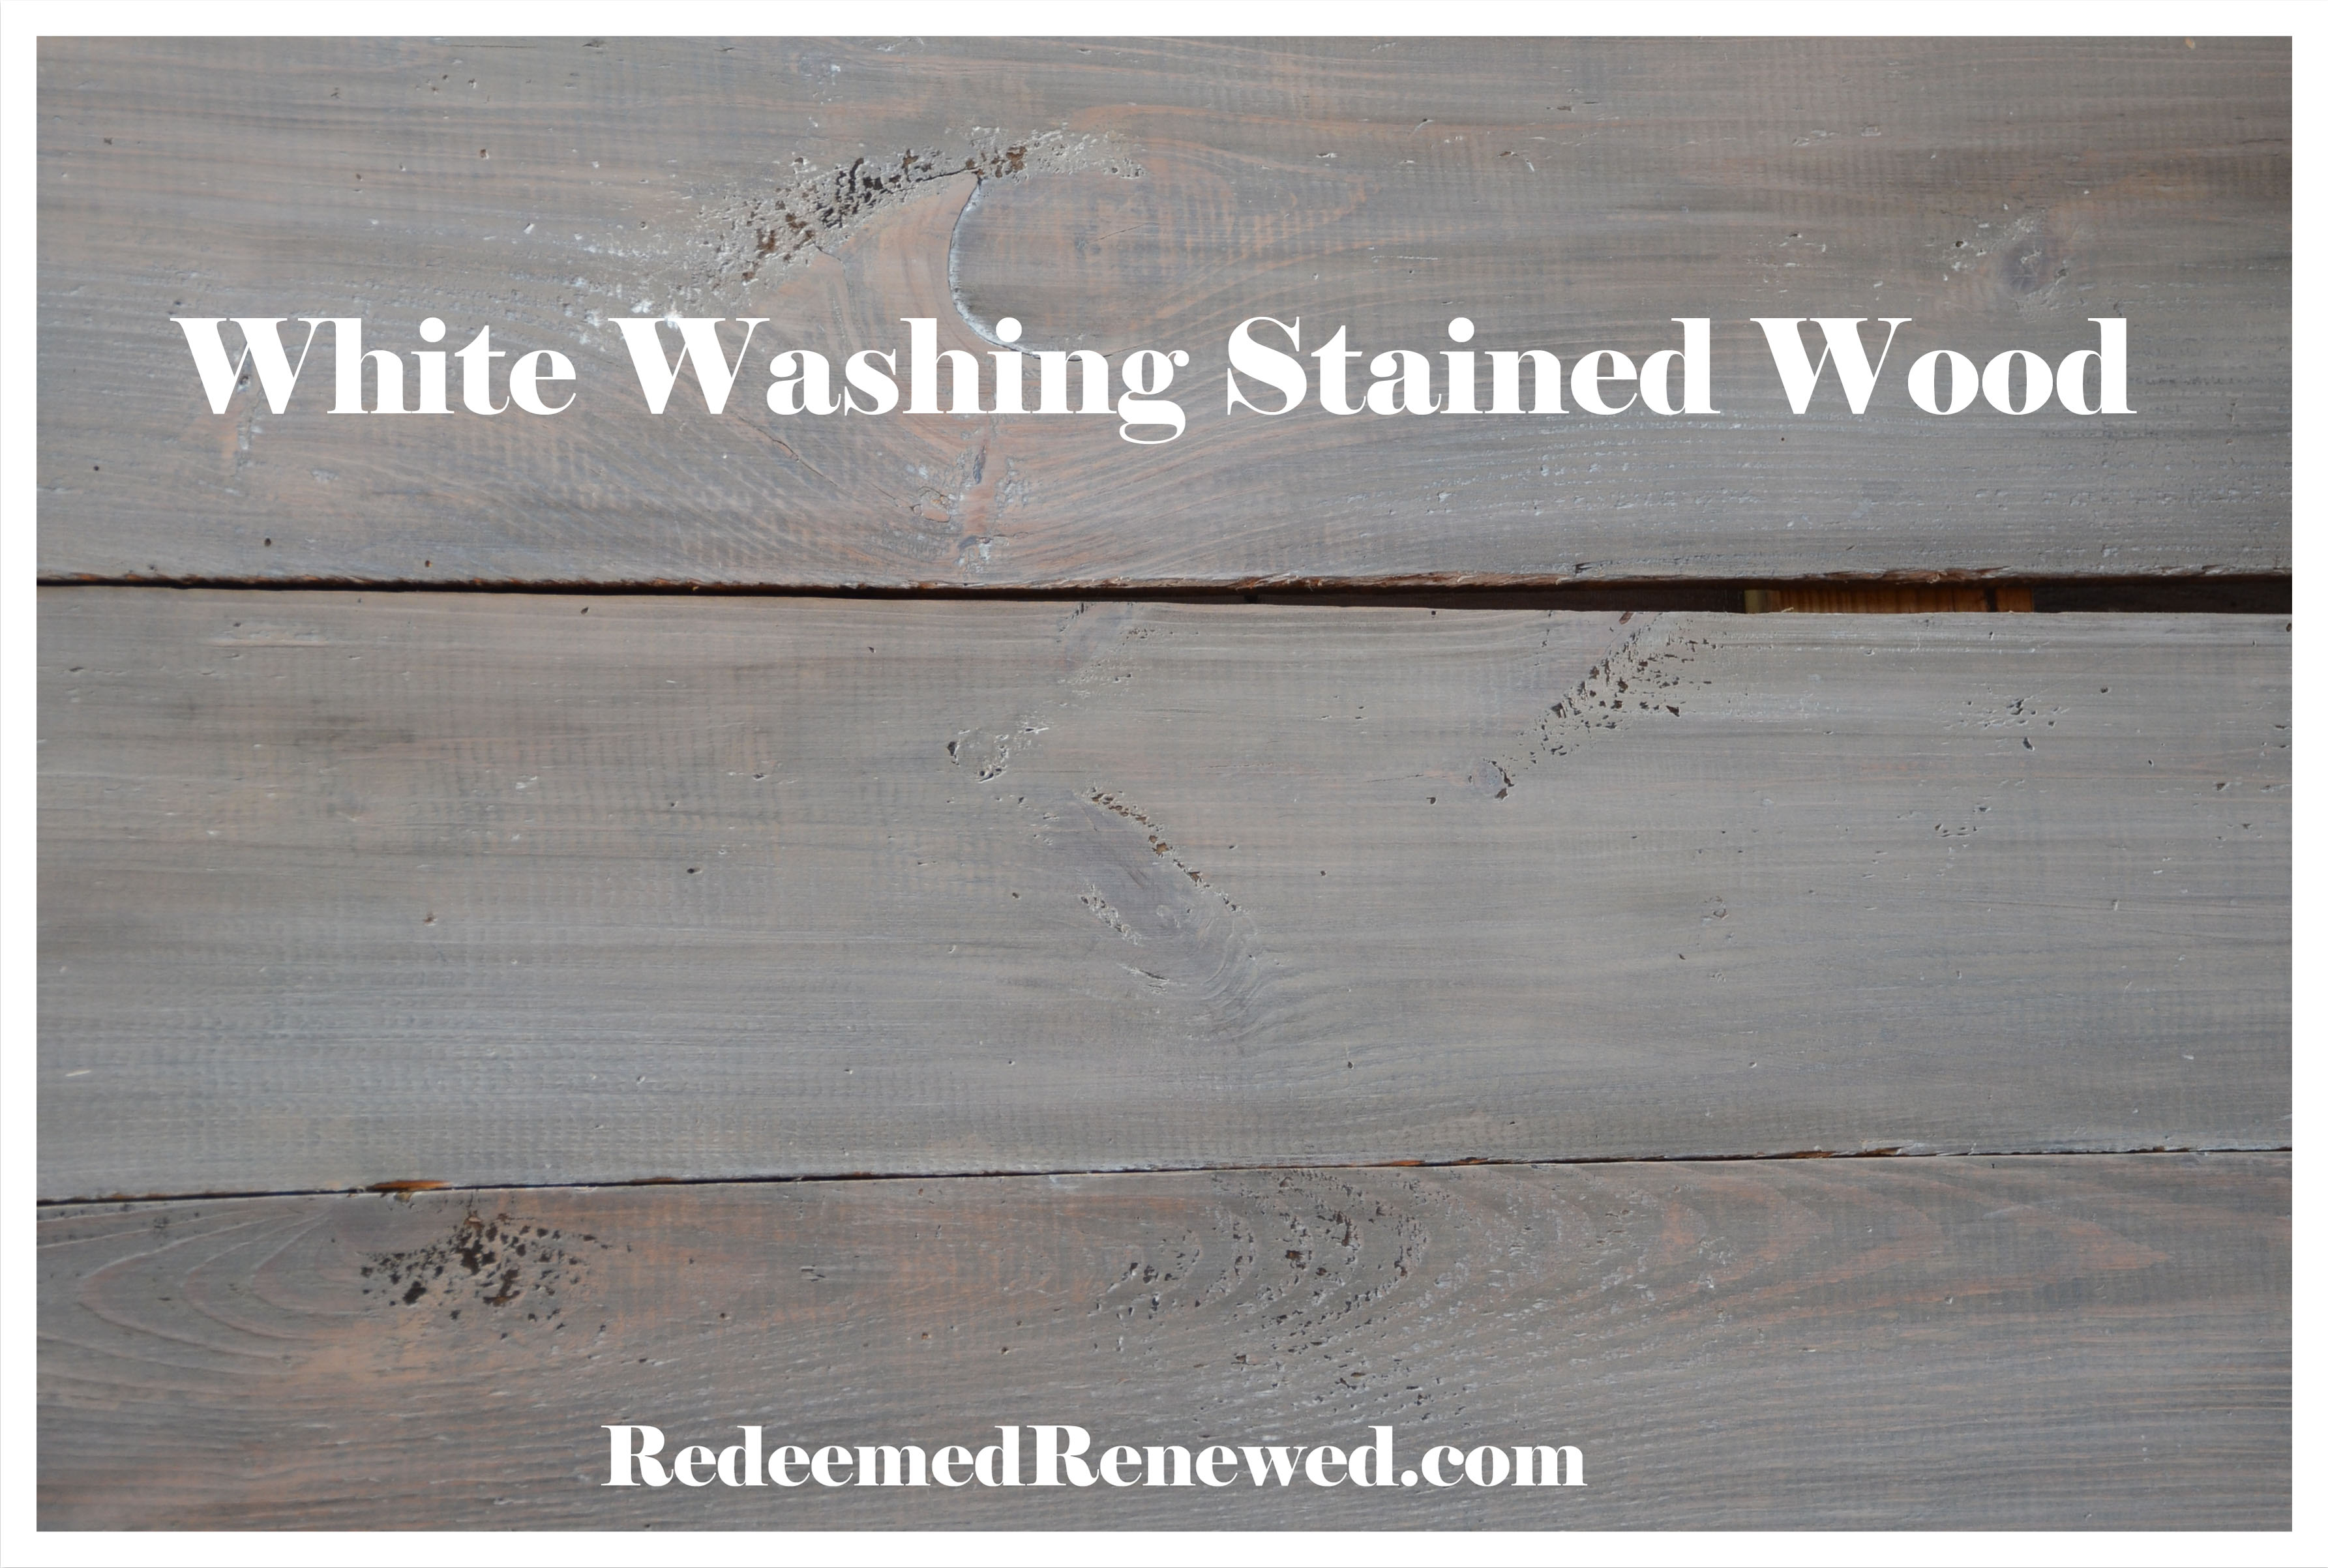 White Washing Stained Wood